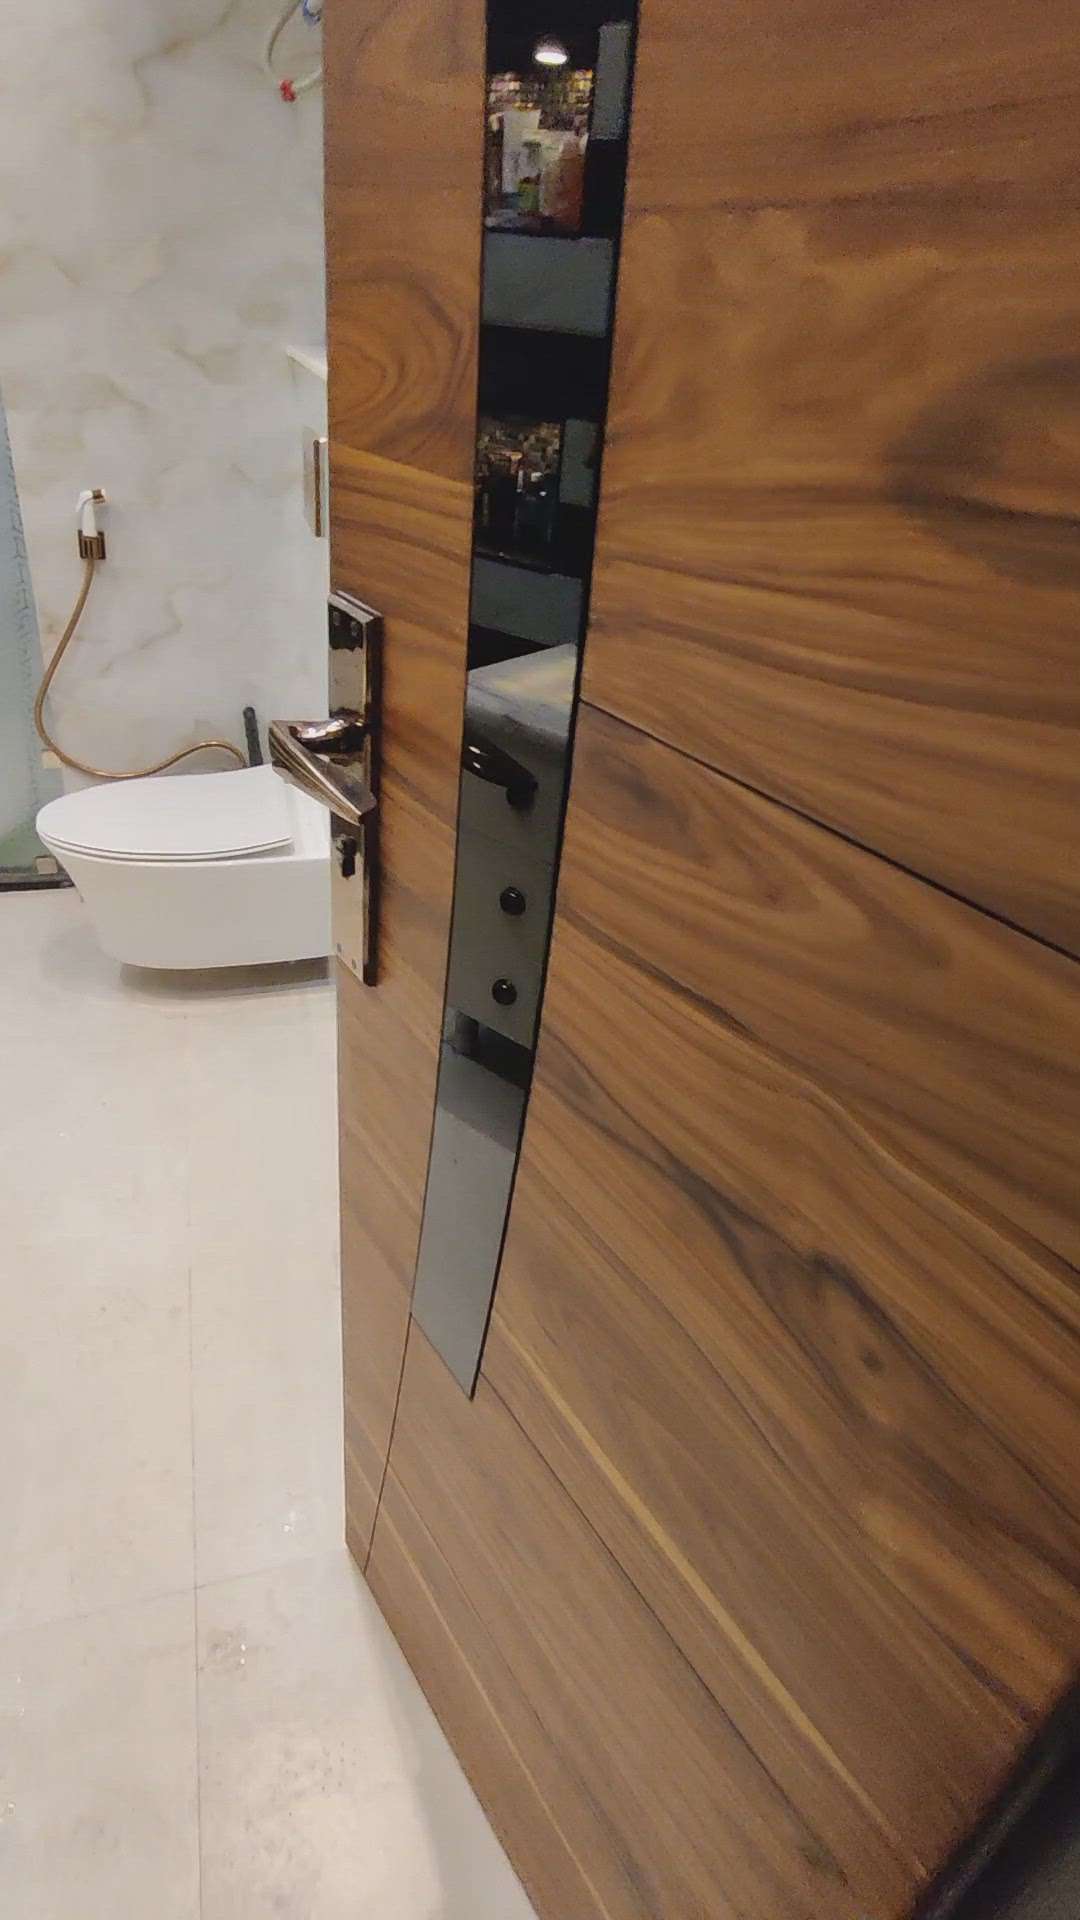 Guess the cost ✌🏻
We have done so many projects with customer satisfaction in delhi NCR and  Gurgaon. Our own factory manufacturing will give you premium quality furniture and our expert team of designers and workers are experts in their work.

Contact us for:
* Interior design
* 2D 3D views
* Civil work and more
Whatsapp : https://wa.me/09319038470
Drop your query : https://forms.gle/ZD3WLRAA8RDhJZJD6
More design visit : https://www.instagram.com/wallstoneinteriors/





#interiordesign #design #interior #homedecor #architecture #home #decor #interiors #homedesign #interiordesigner #furniture #decoration #interiordecor #interiorstyling #indiadesignid2023 #designer #indiadesignid  #homesweethome #gurgaon #gurgaoninterior #furnituredesign #realestate #instagood #delhi #delhincr #wallstone #wallstoneinteriors #newgurgaon #gurgaonone